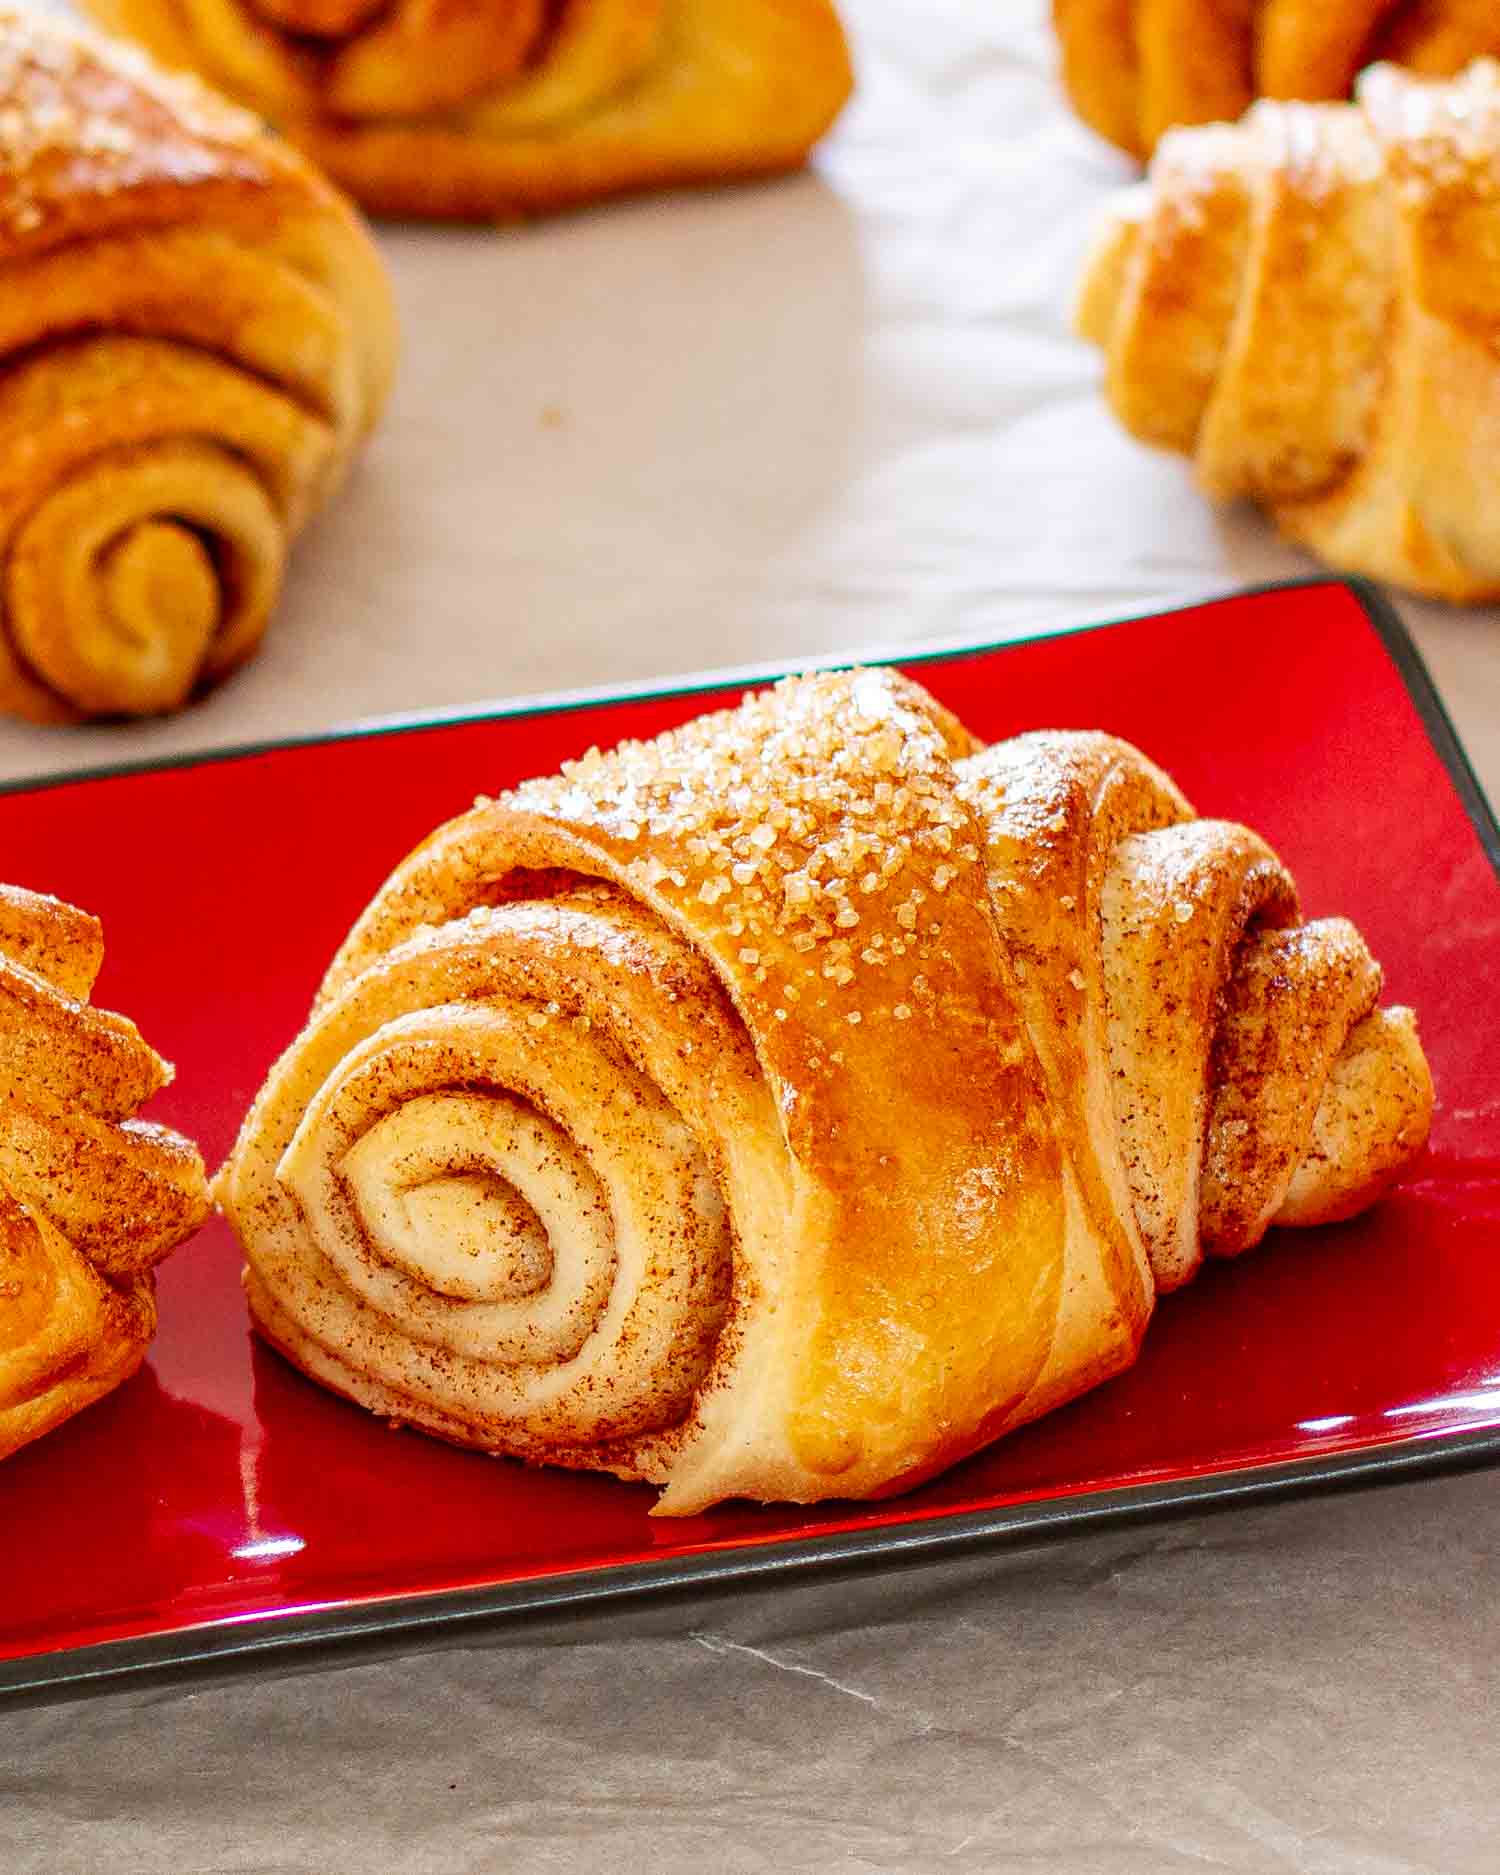 freshly baked finnish cardamom rolls on a red plate.